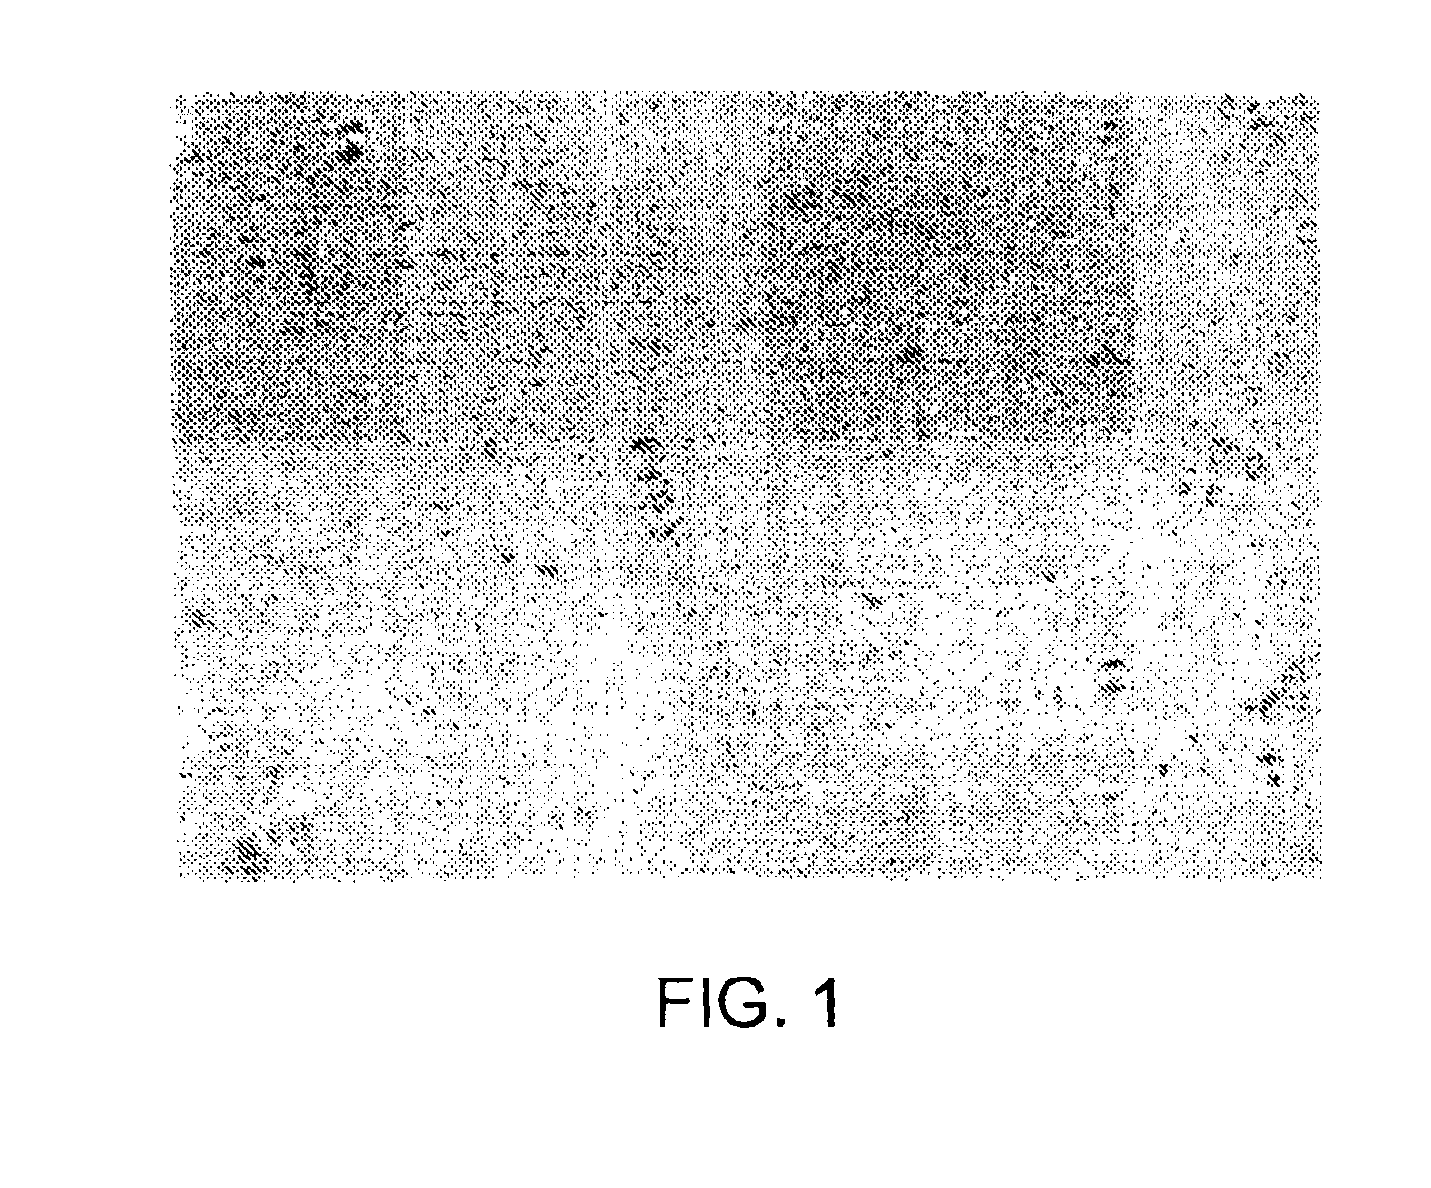 Biphasic lipid-vesicle compositions and methods for treating cervical dysplasia by intravaginal delivery